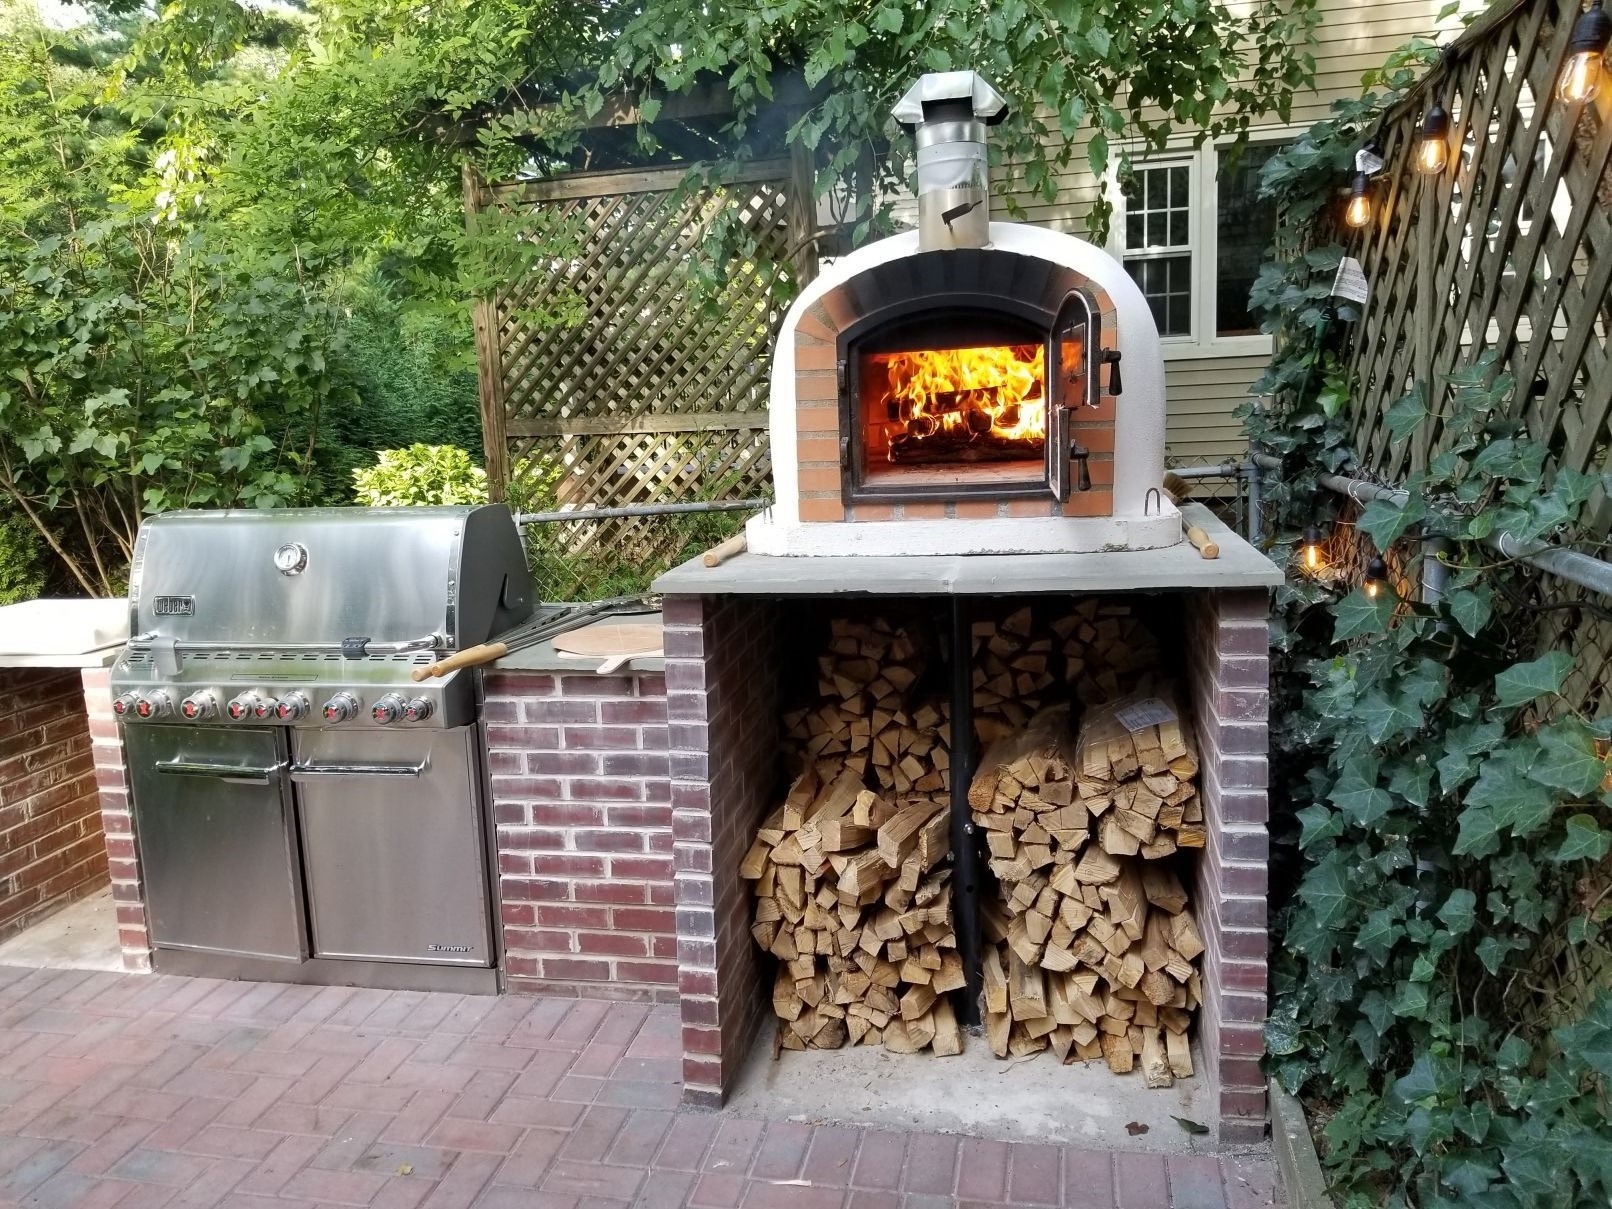 Brick Pizza Oven Wood Fired Outdoor, Outdoor Brick Oven Pizza